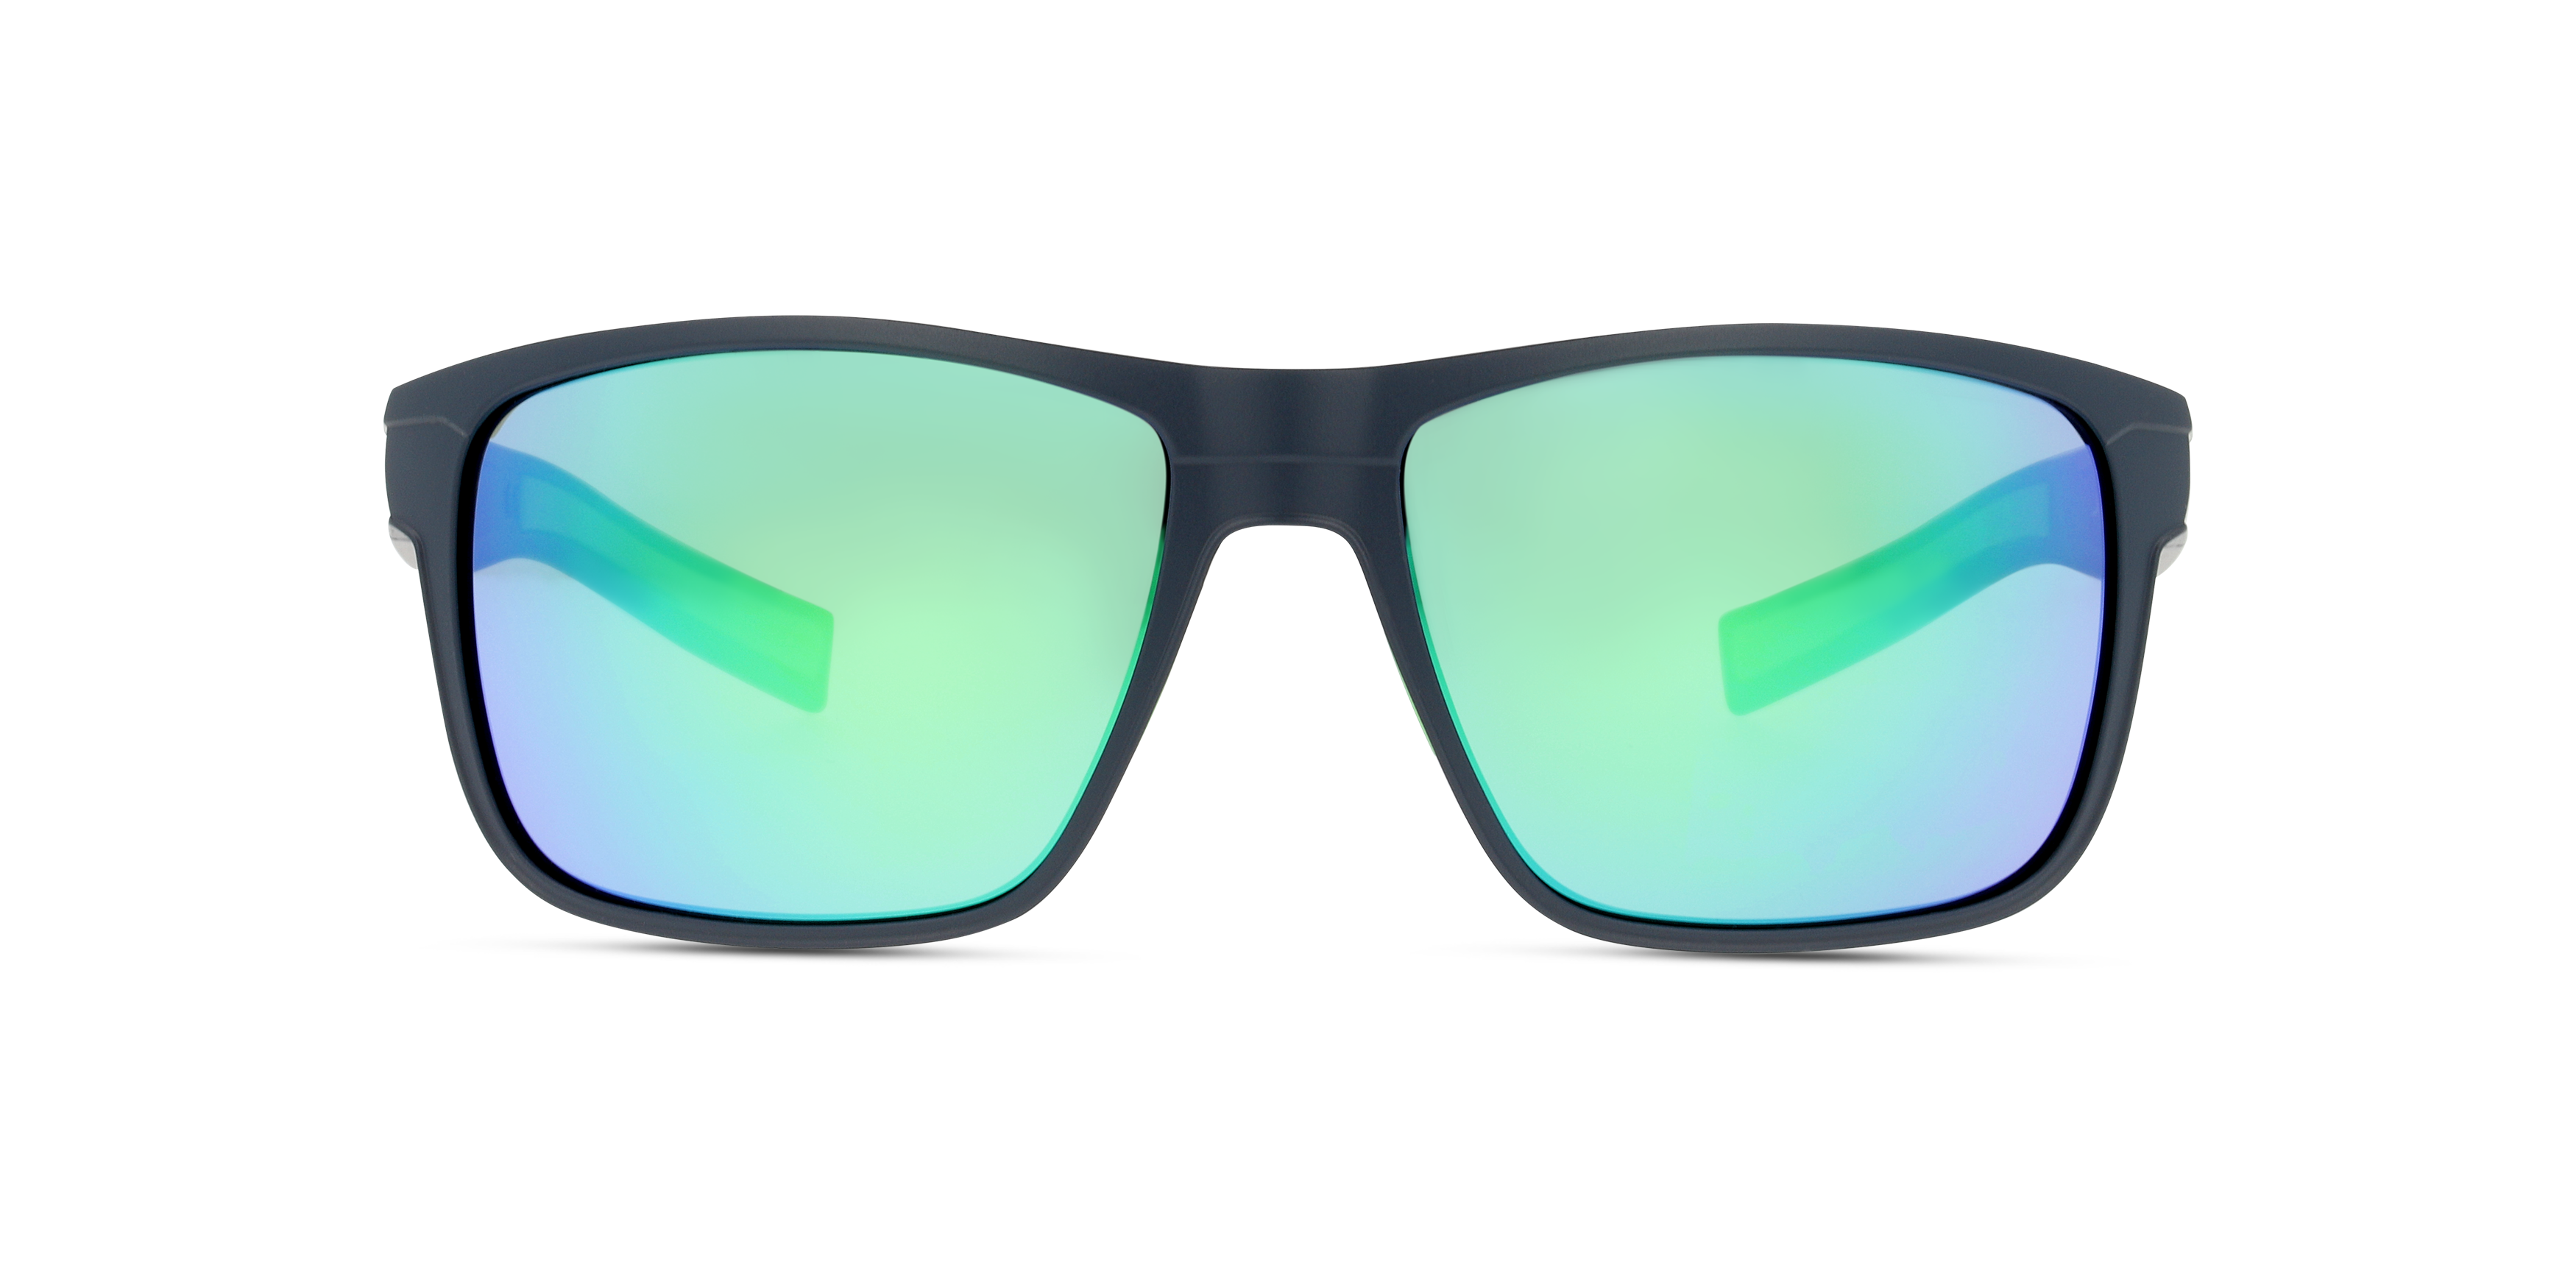 [products.image.front] JULBO Renegade J499 12